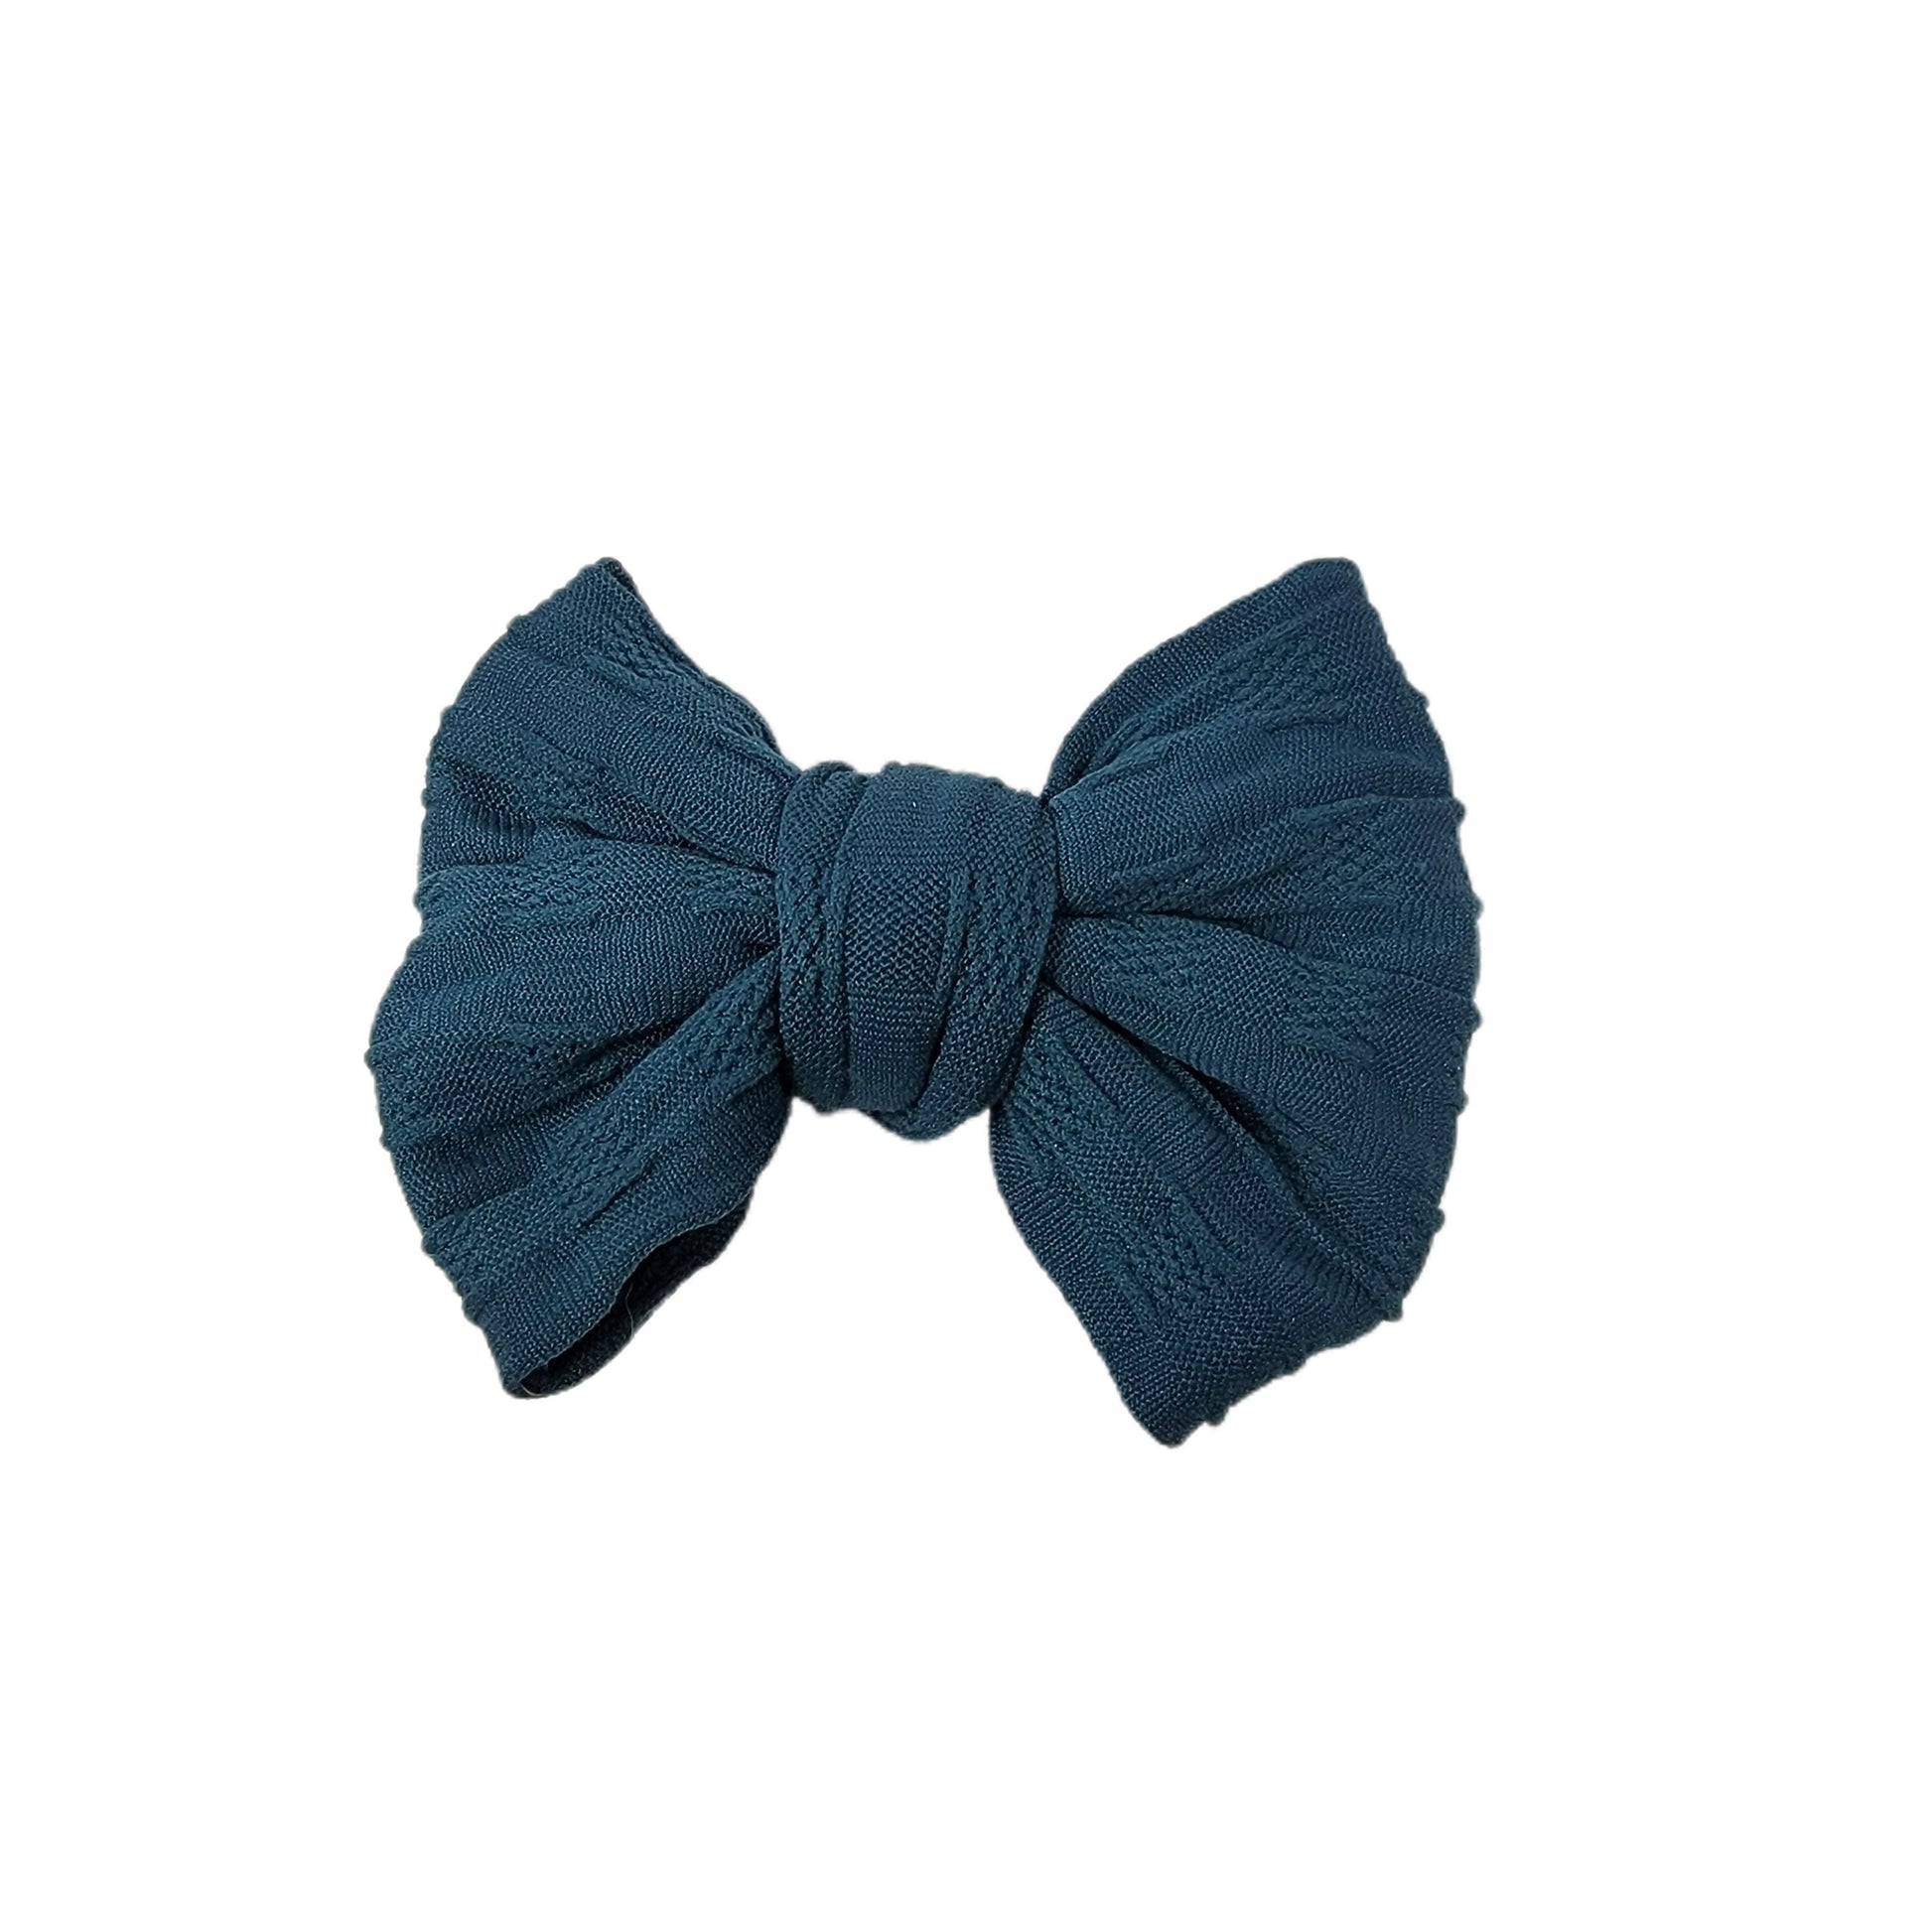 Dark Teal Woven Knit Fabric Bow 4" 